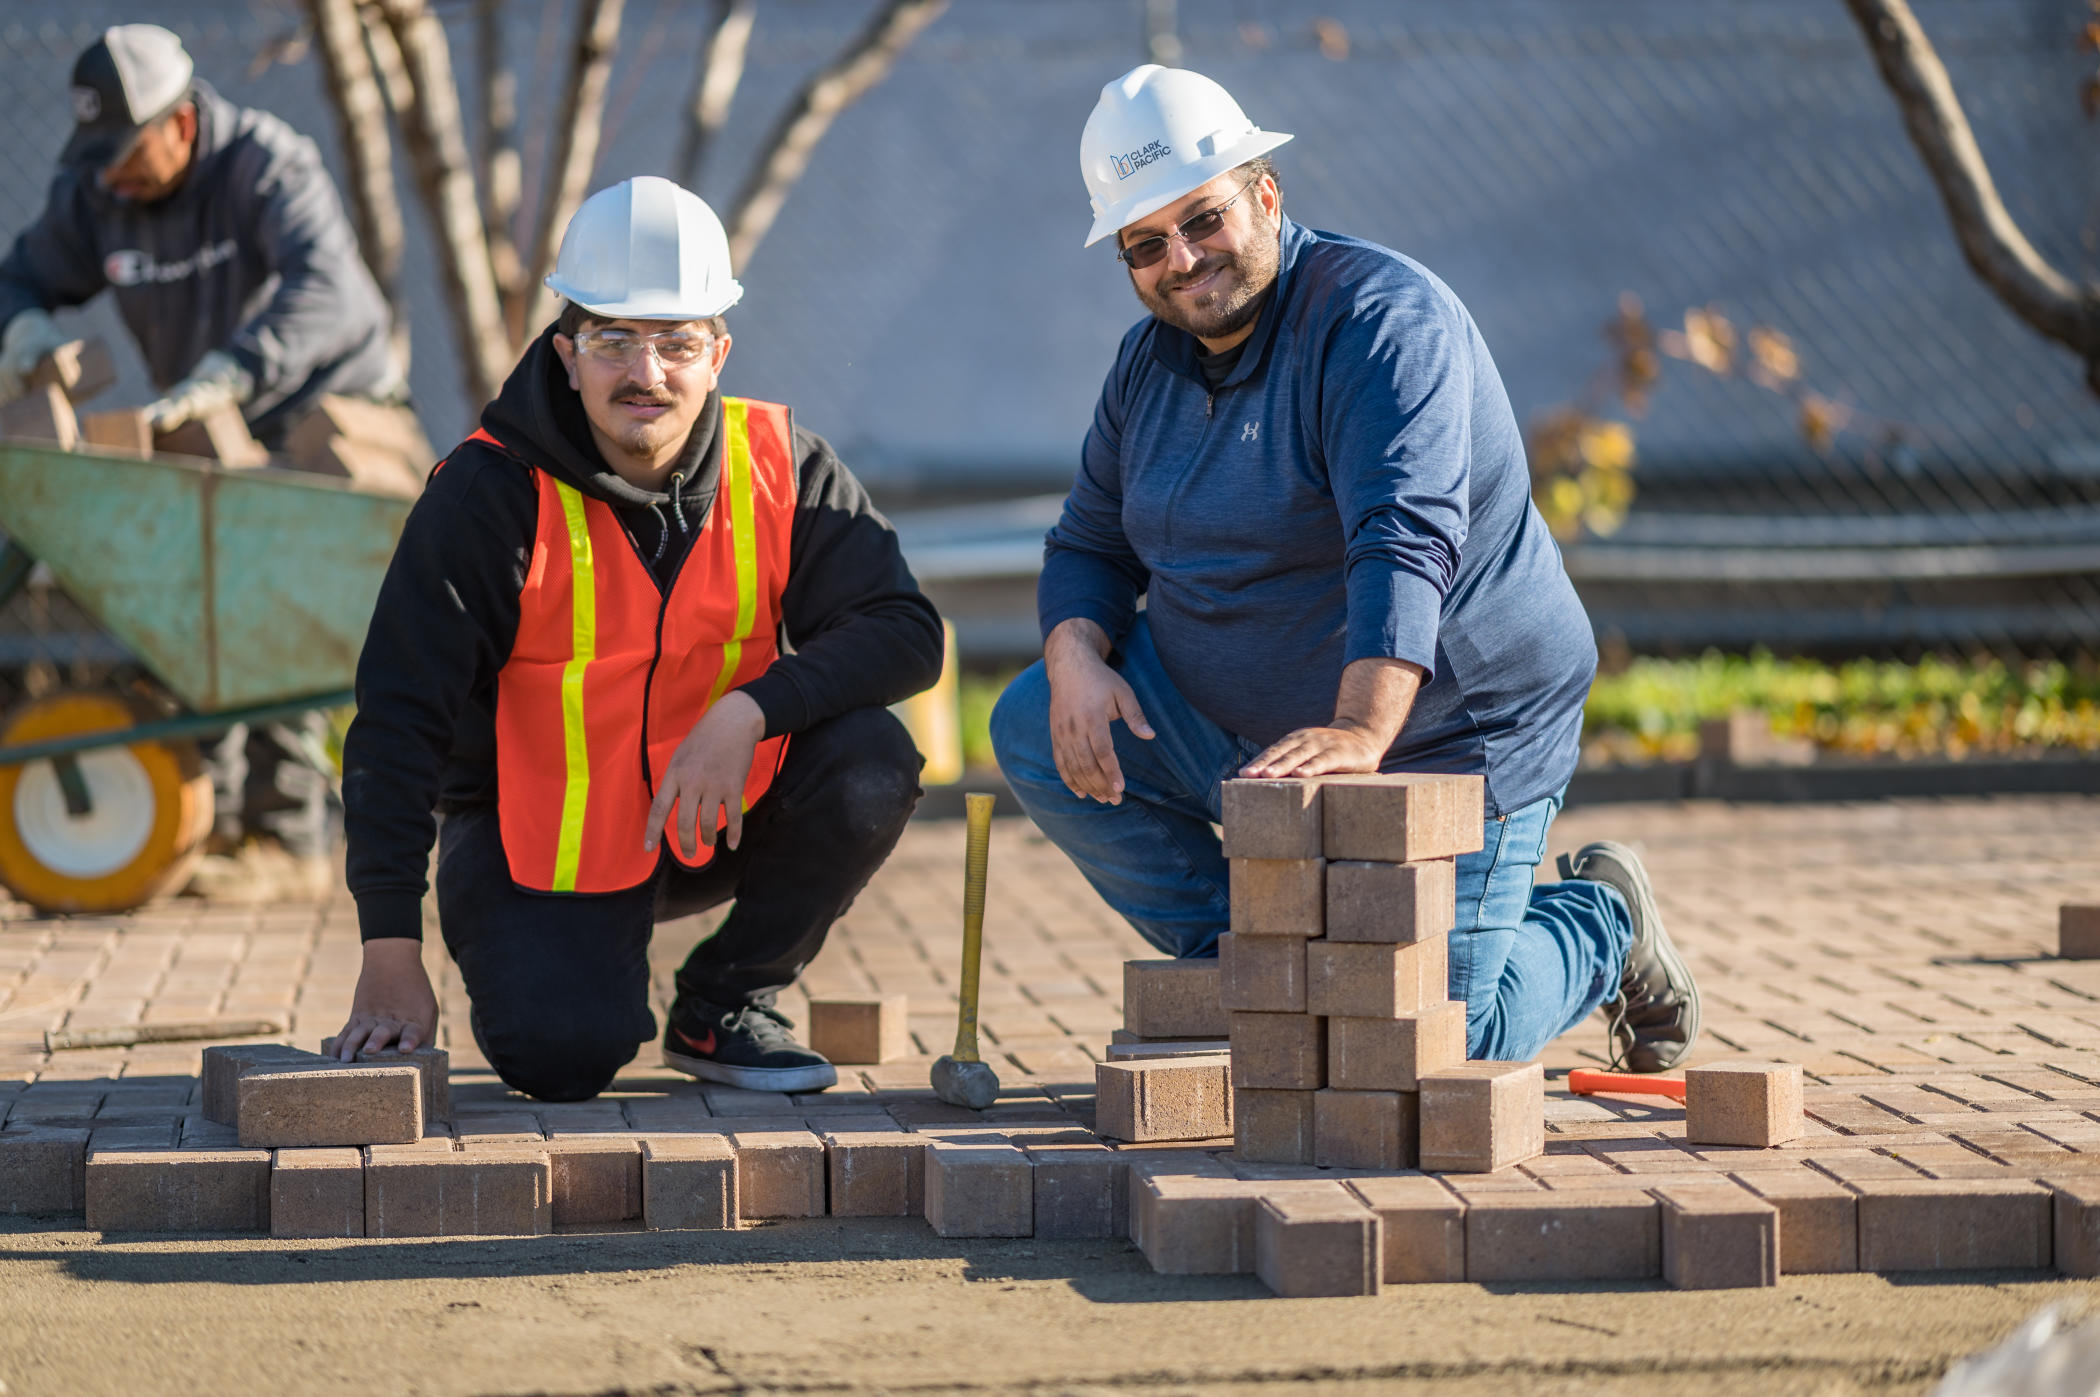 A student (left), wearing an orange safety vest, kneels alongside Professor Mohammed Albahttiti (right) while the two work on installing pavers at the site of a community service project at the Chico Islamic Center.